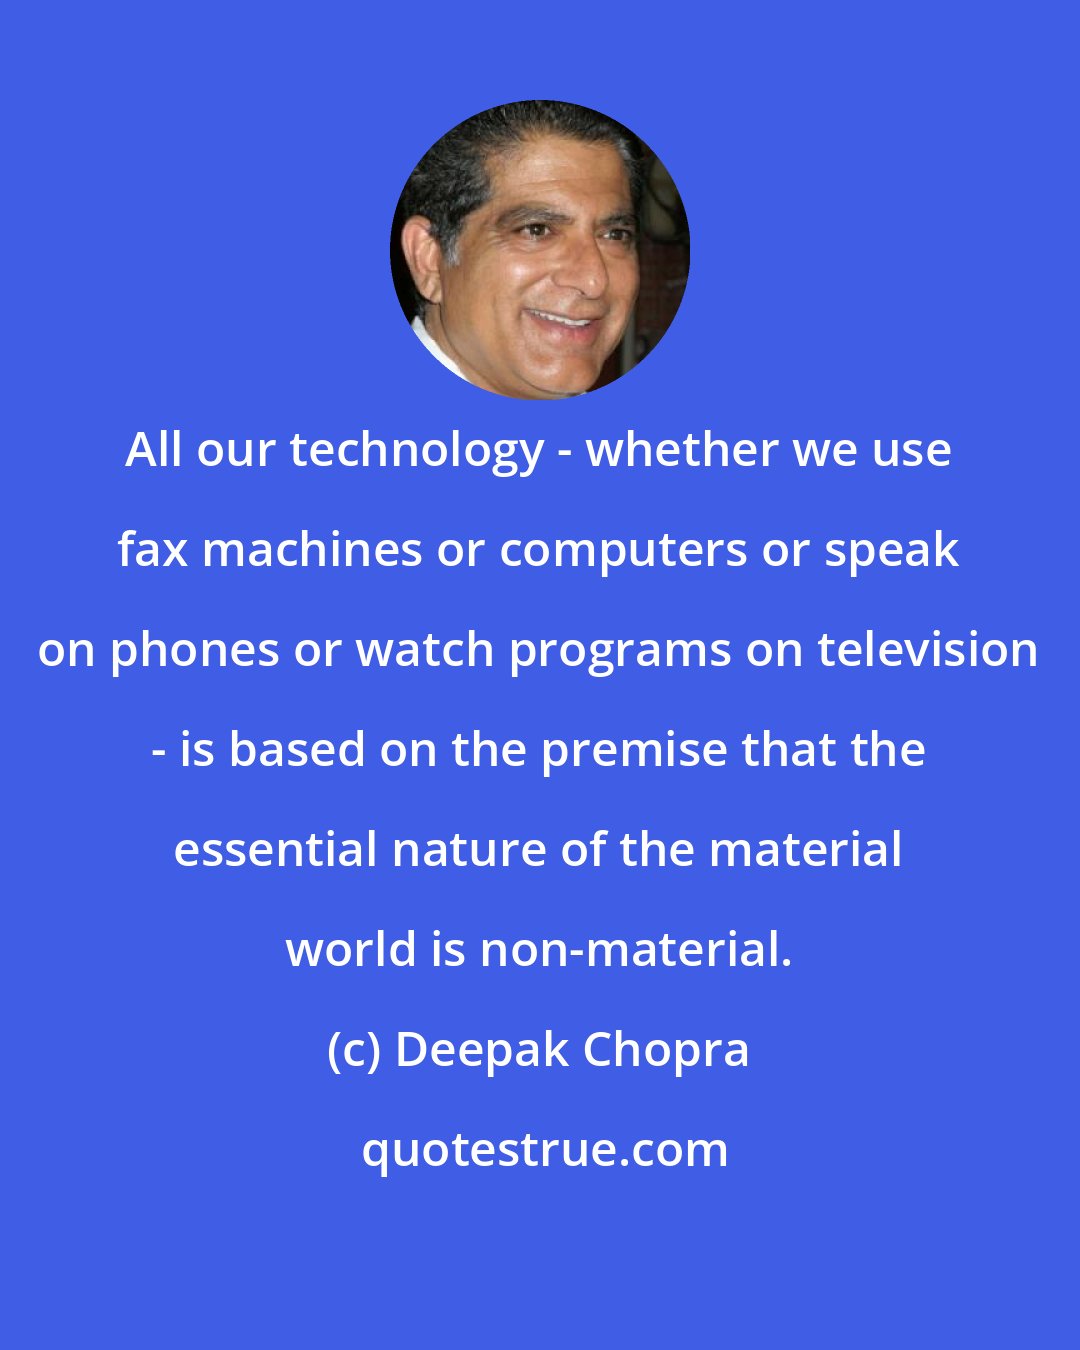 Deepak Chopra: All our technology - whether we use fax machines or computers or speak on phones or watch programs on television - is based on the premise that the essential nature of the material world is non-material.